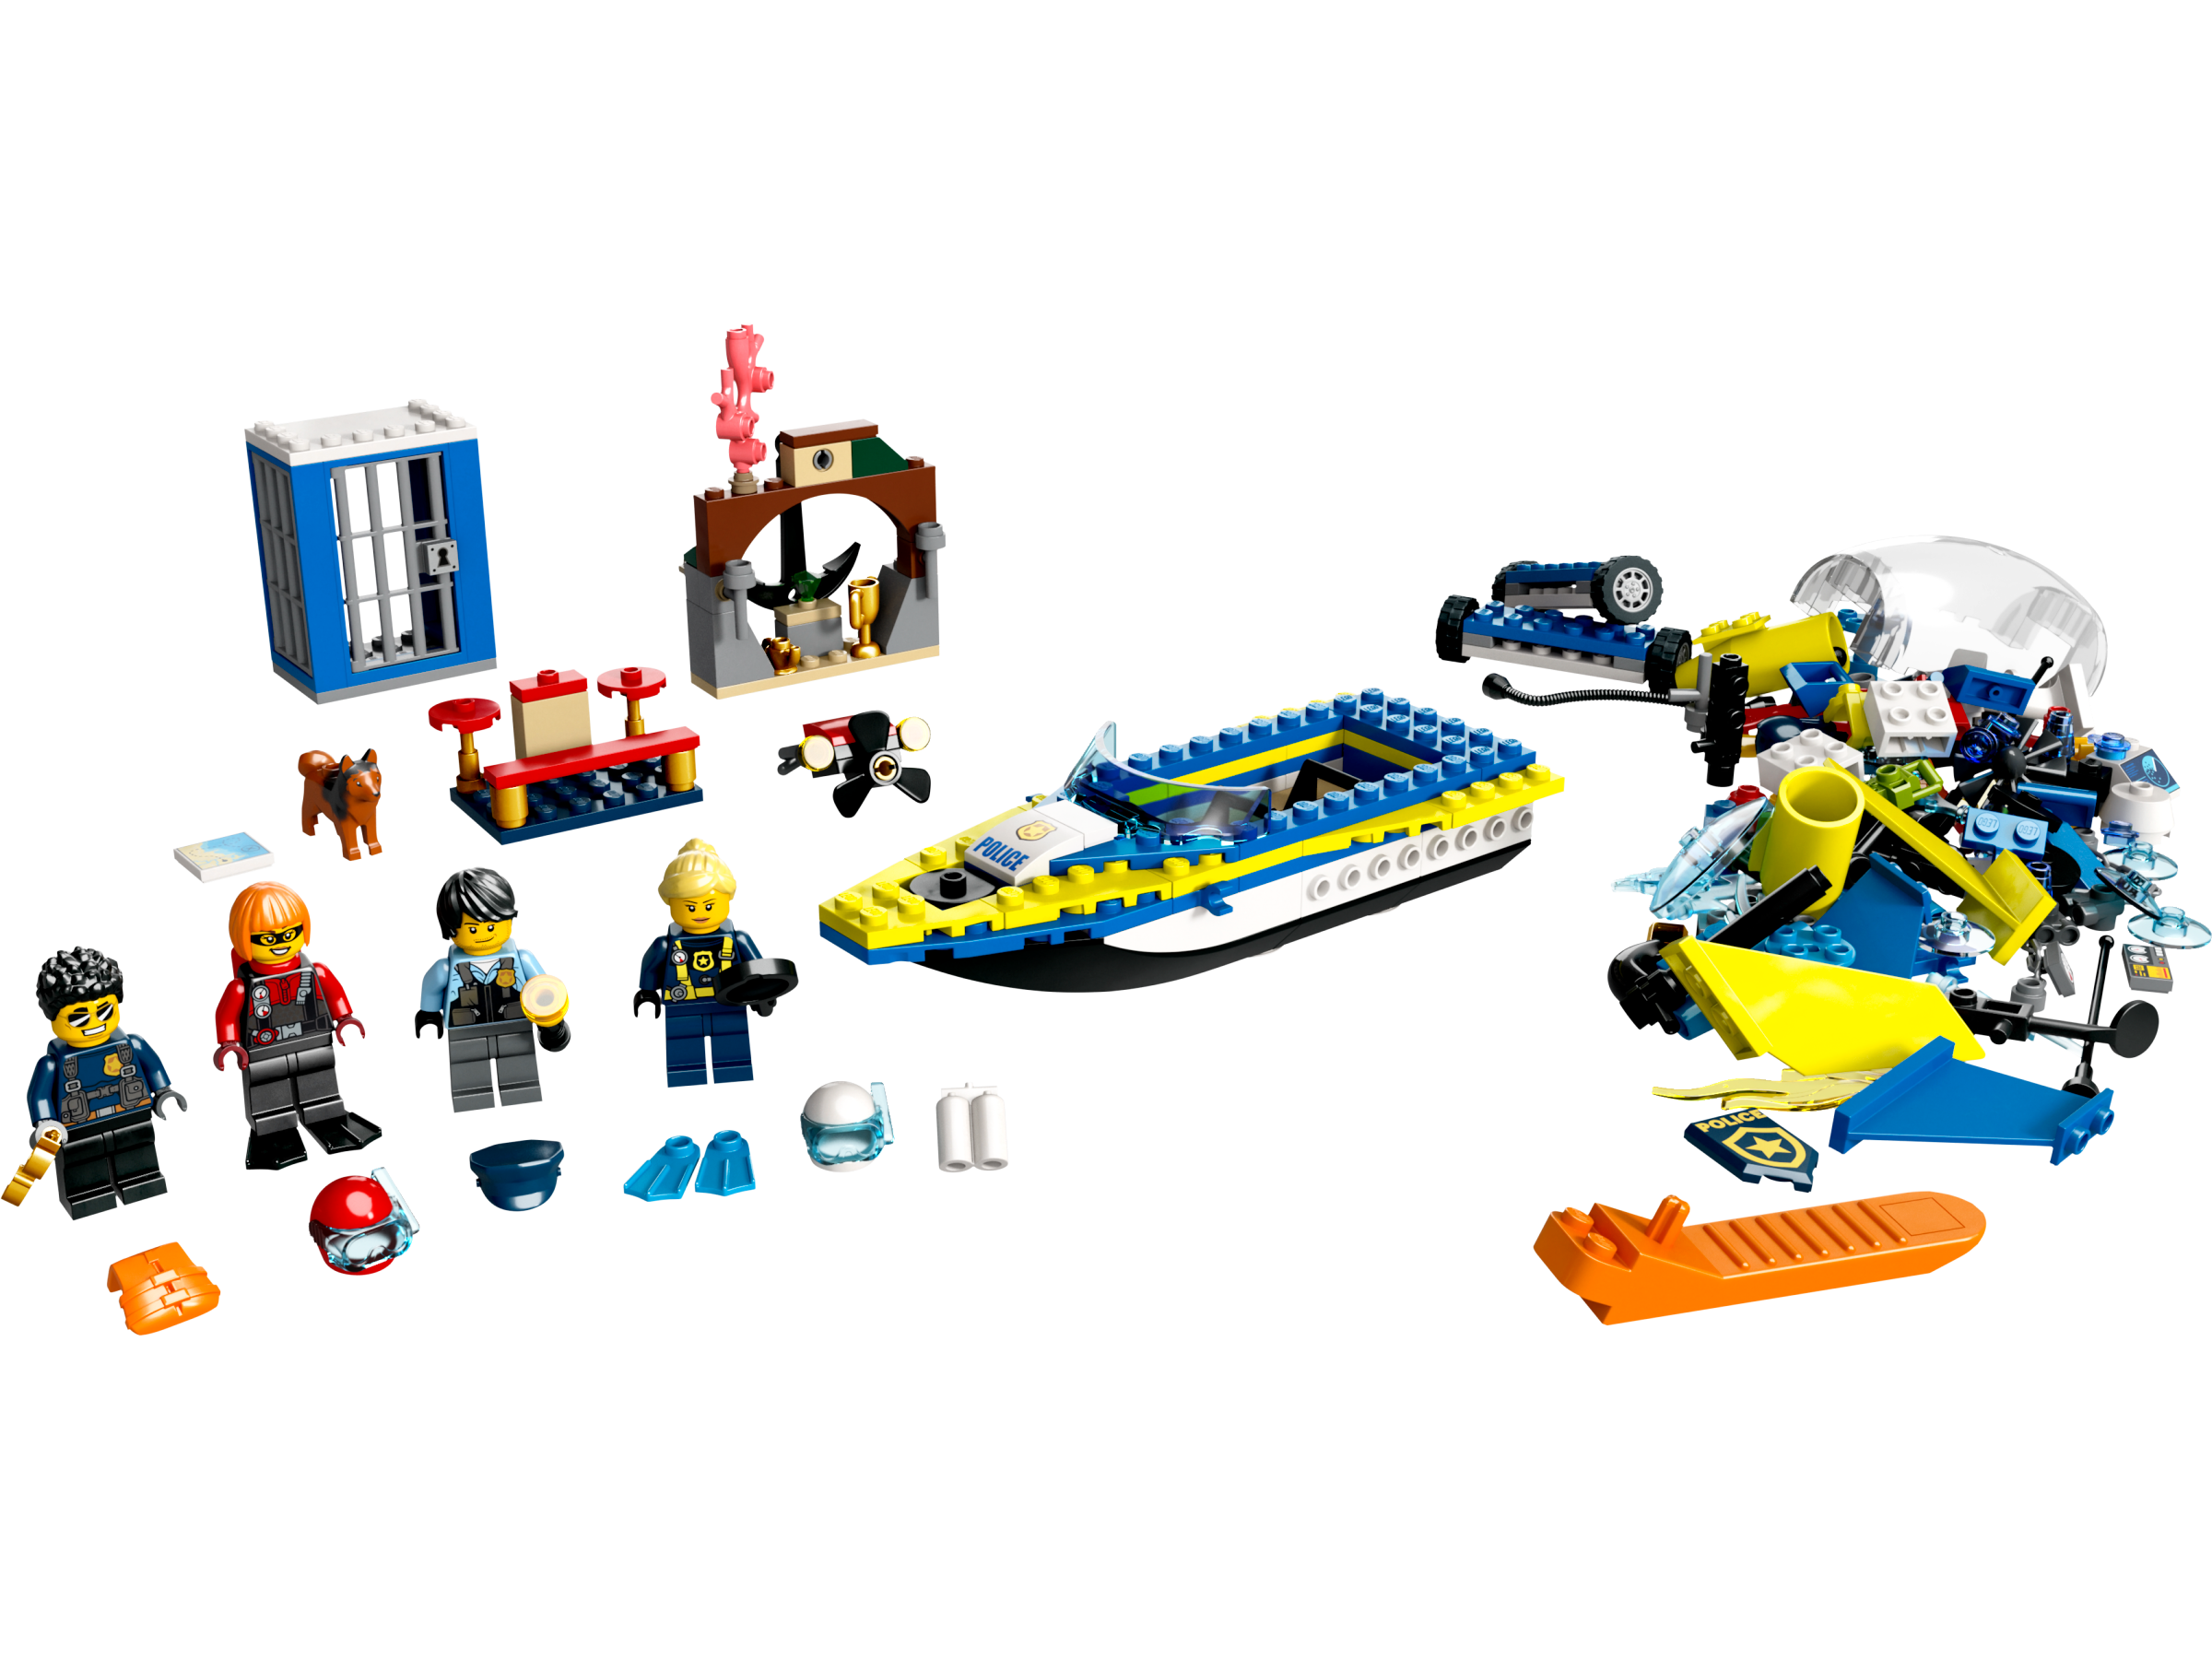 LEGO PROMO POLY BAG SETS ALIEN CONQUEST,CHIMA,CITY,CREATOR,FRIIEND & MANY MORE 2 